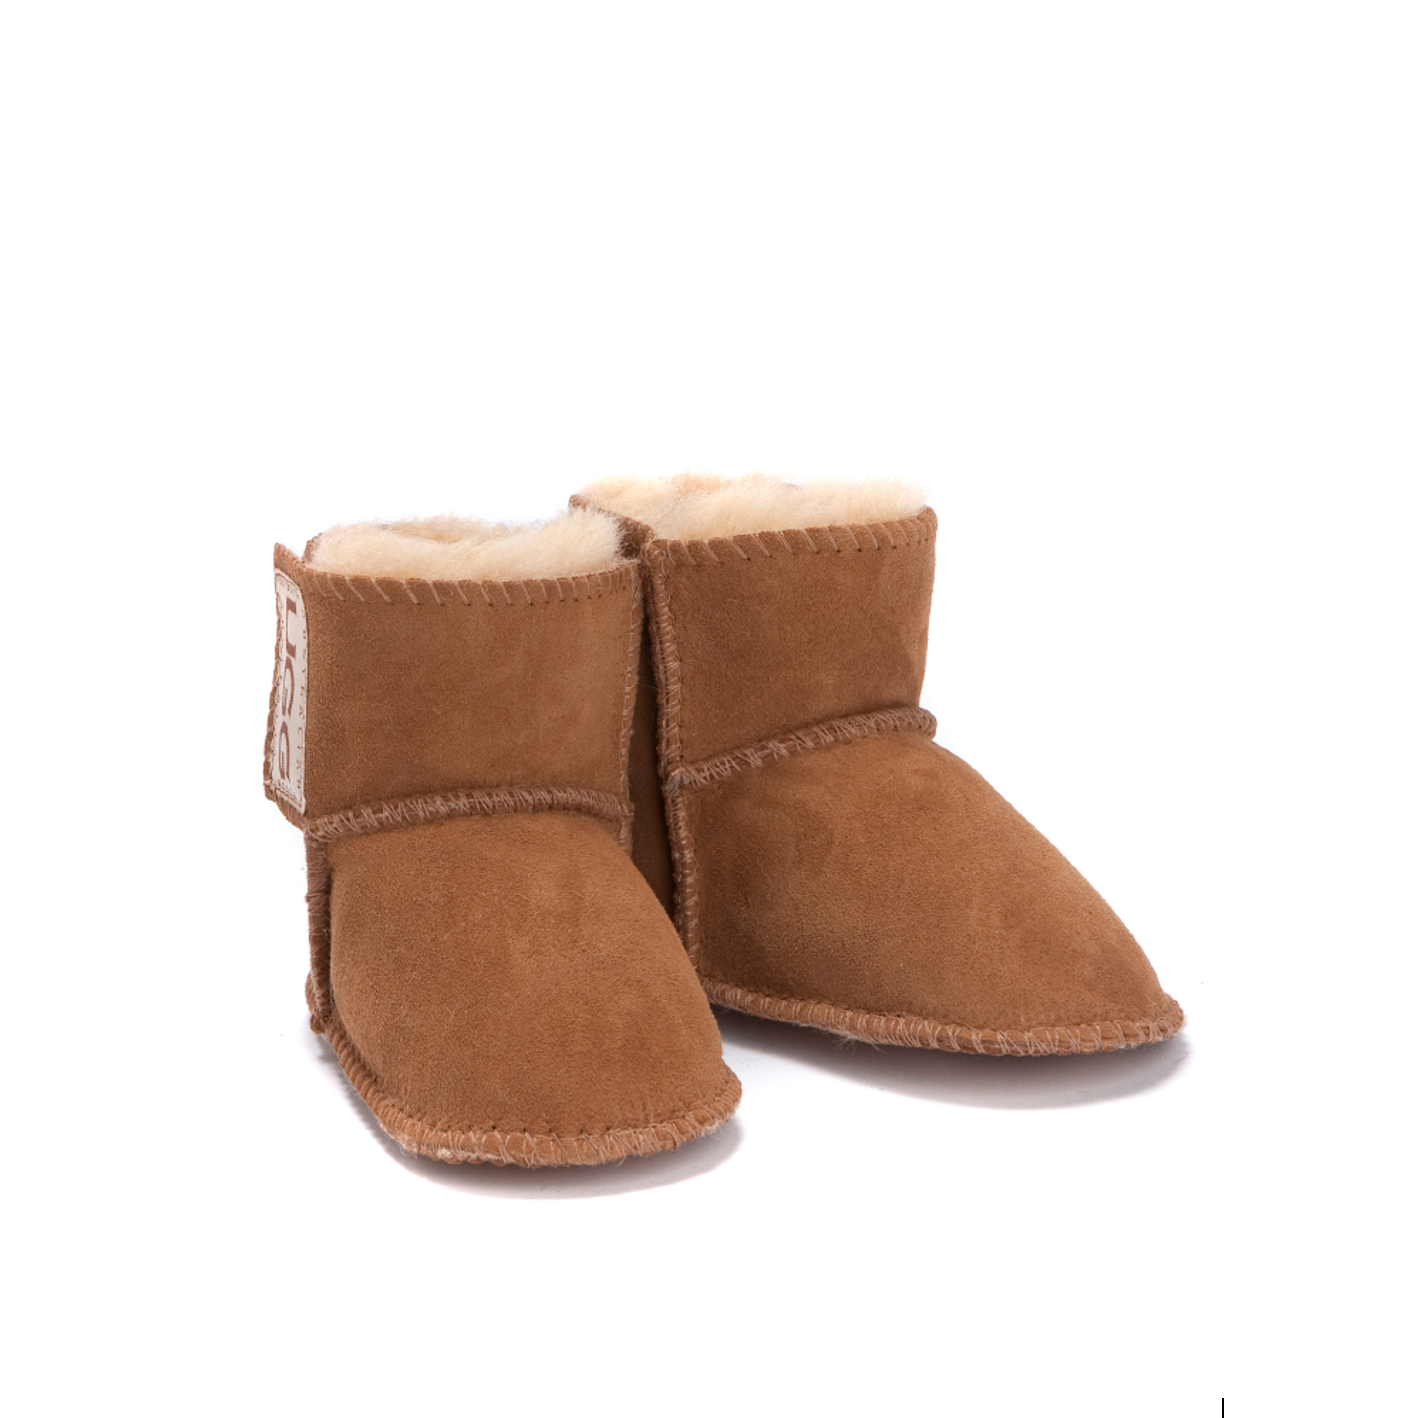 Baby Buggies Chestnut - Australian made Uggs for babies